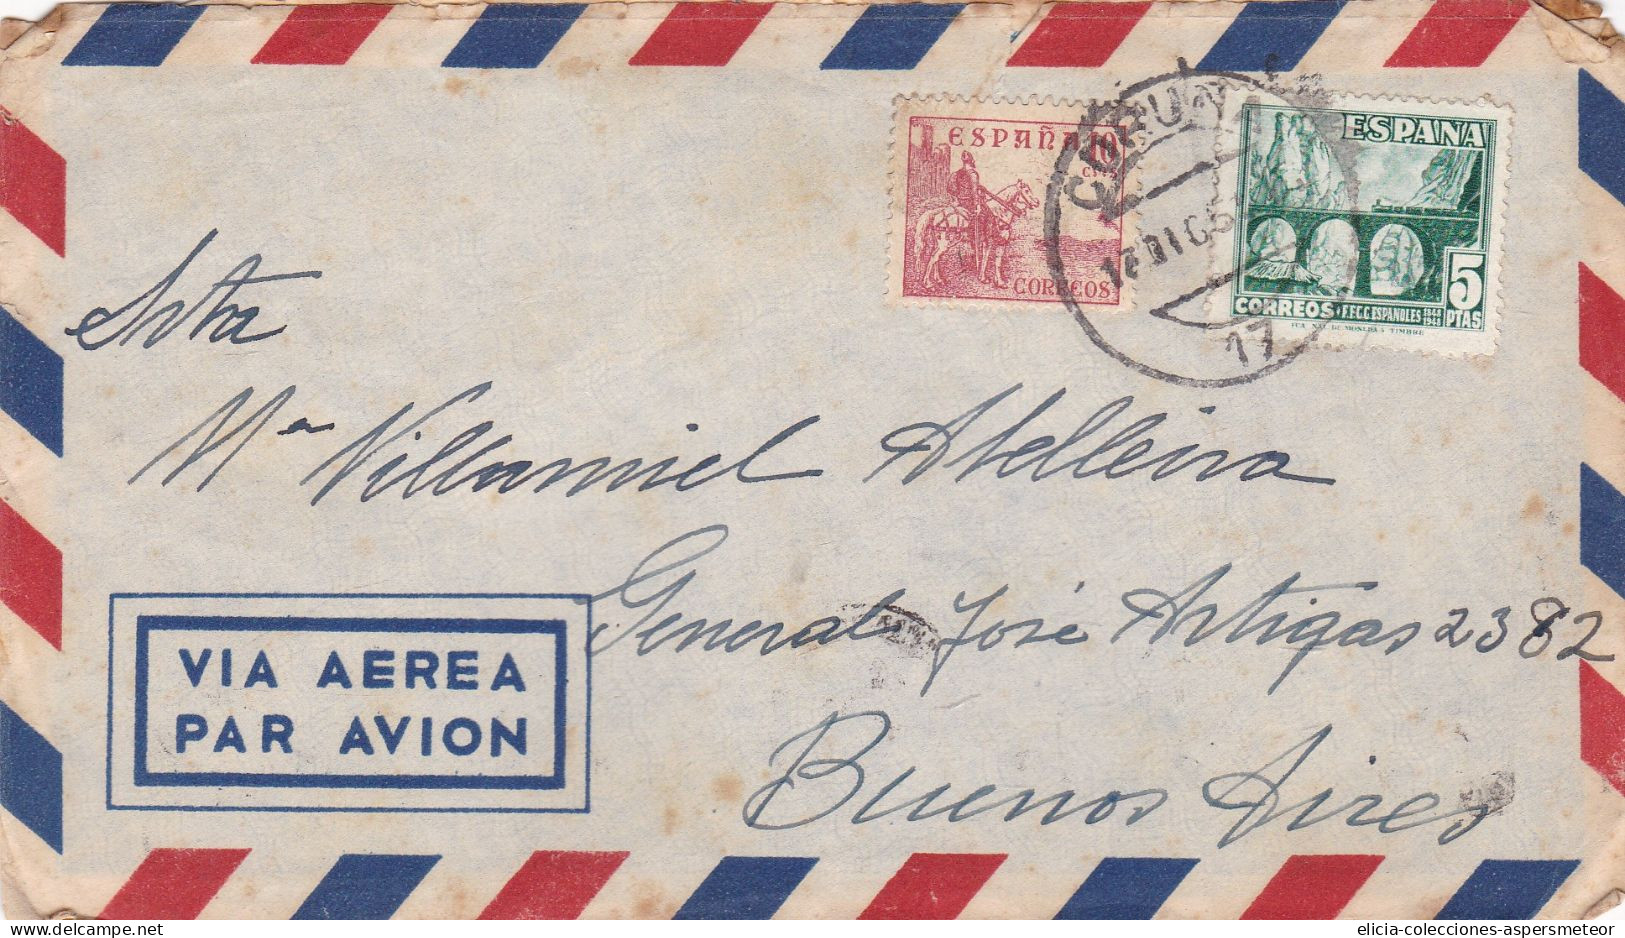 Spain - 1951 - Airmail - Letter - Sent From La Coruña To Buenos Aires, Argentina - Caja 30 - Covers & Documents